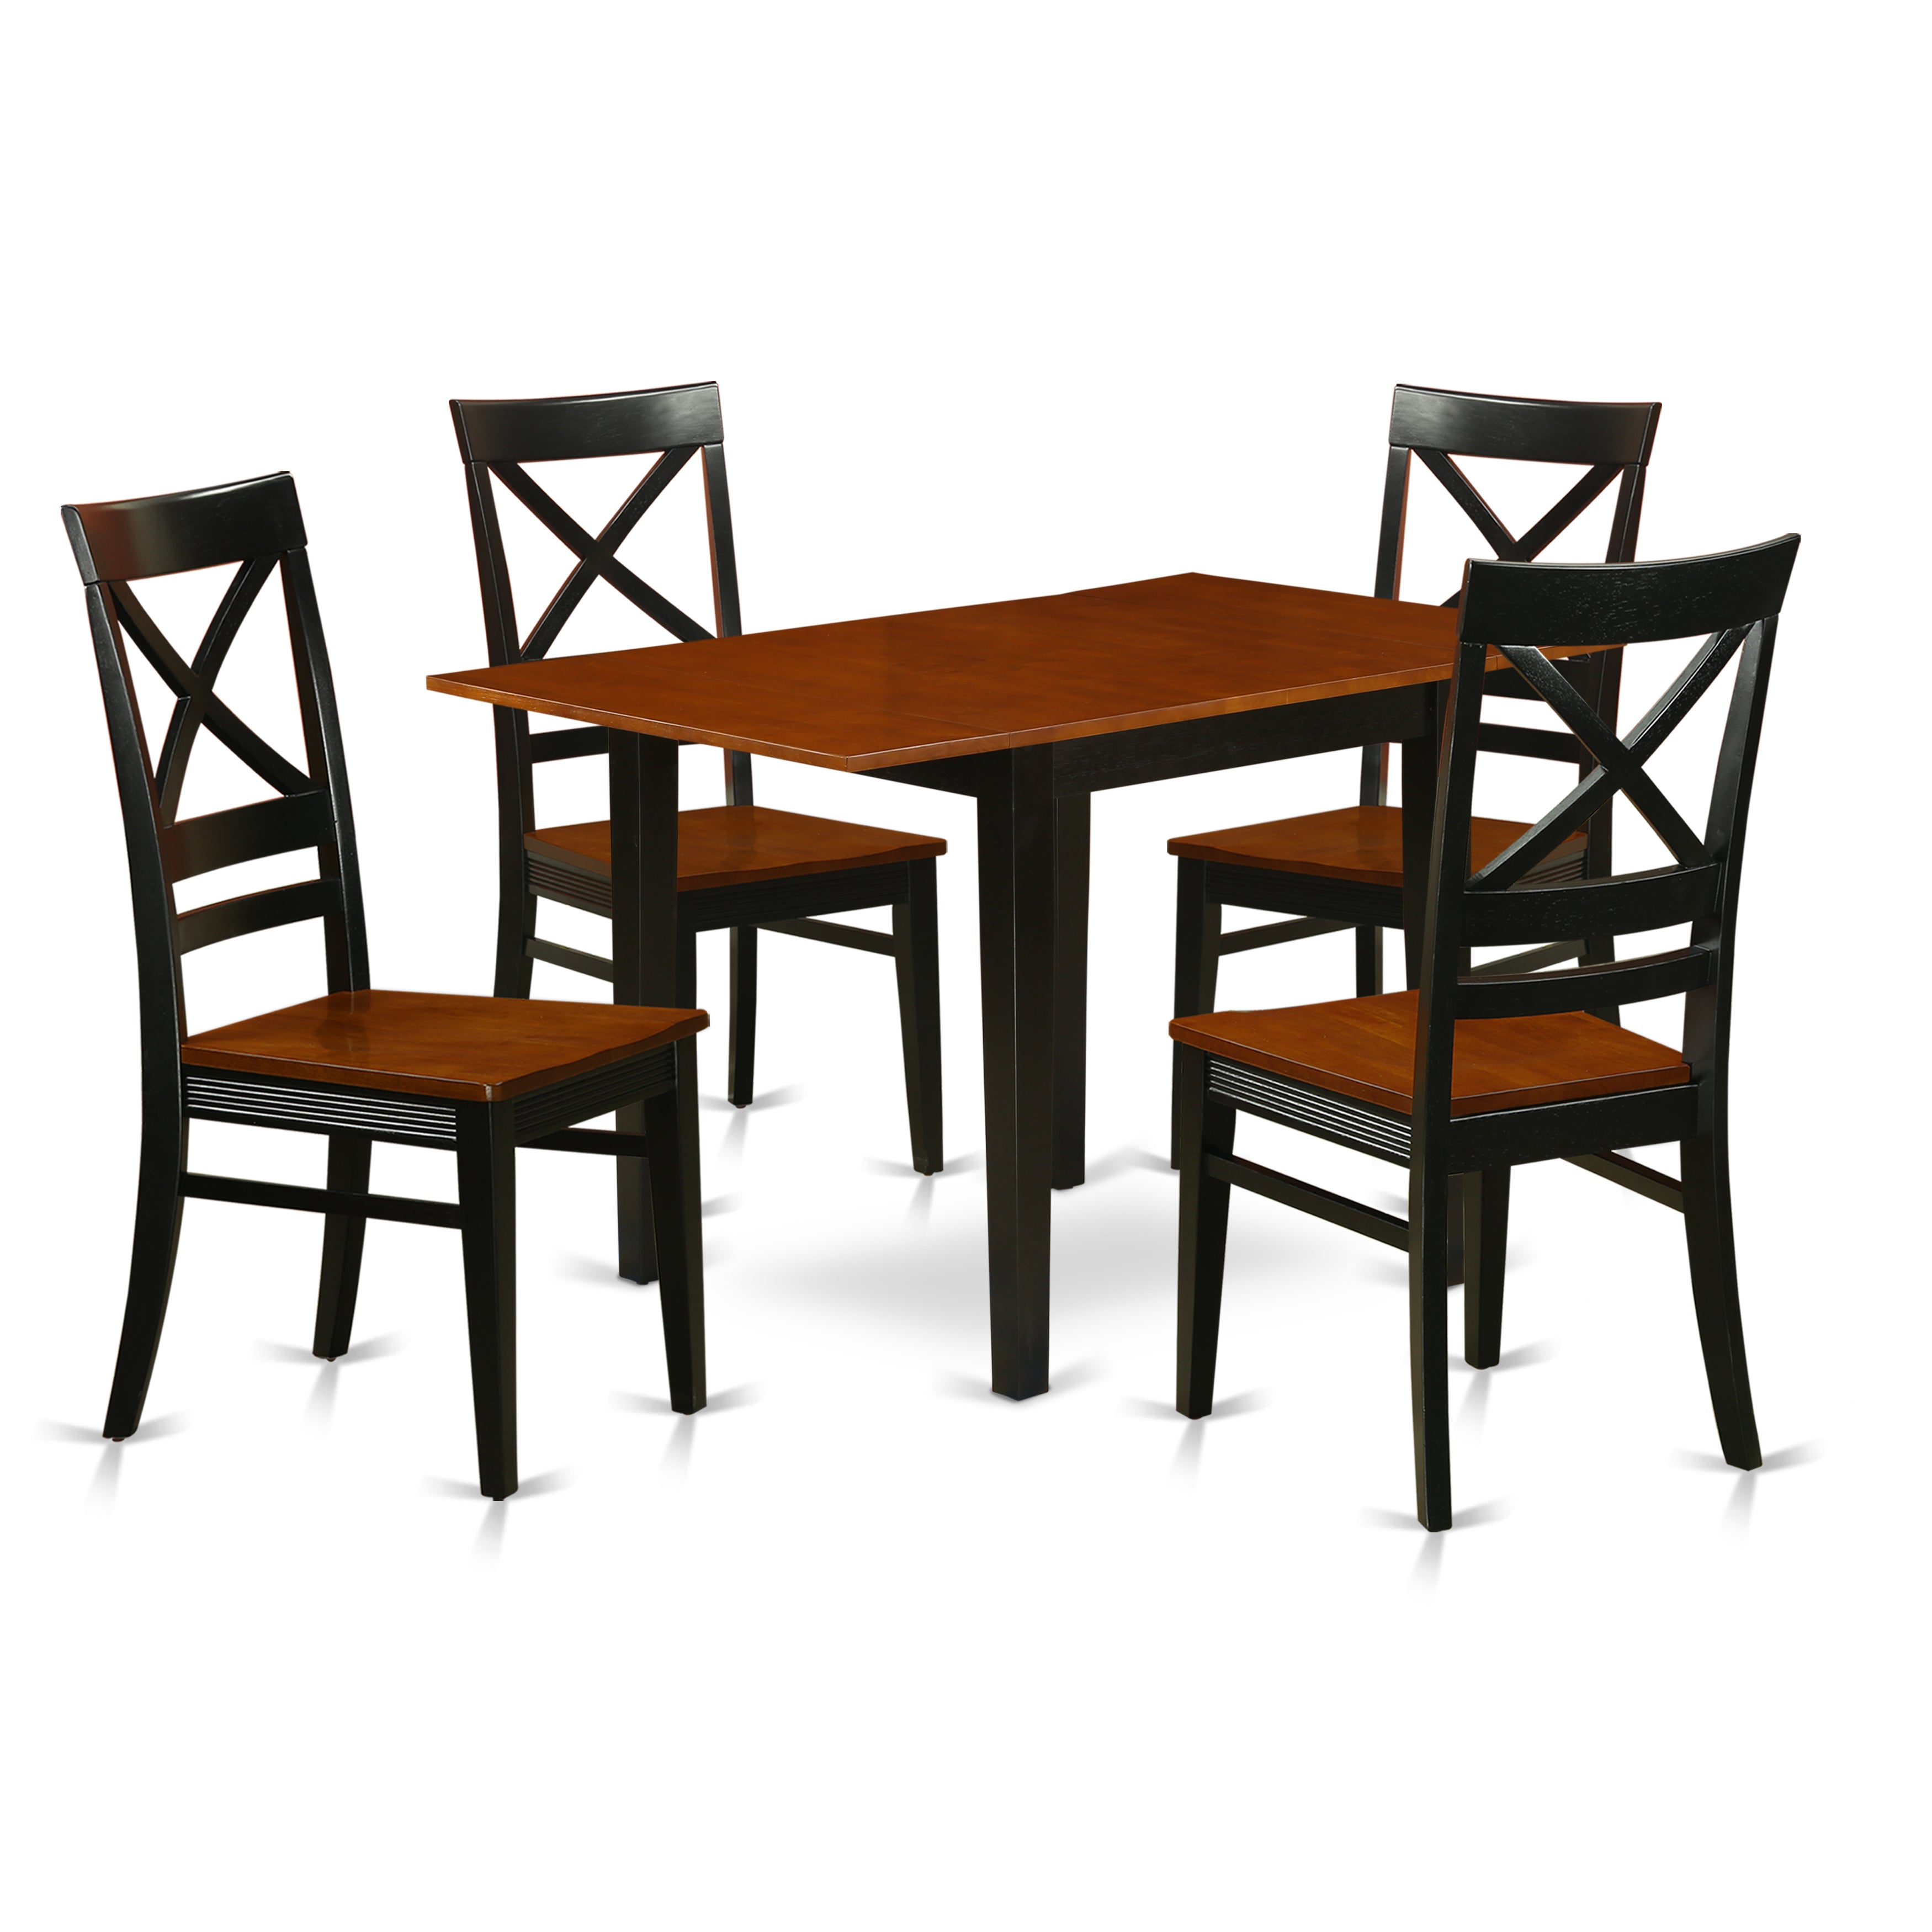 East West Furniture NDQU5-BCH-W, 5Pc Dinette Set for Small Spaces Offers a Wood Dining Table and 4 Dining Chairs with Solid Wood Seat and X Back, Black and Cherry Finish